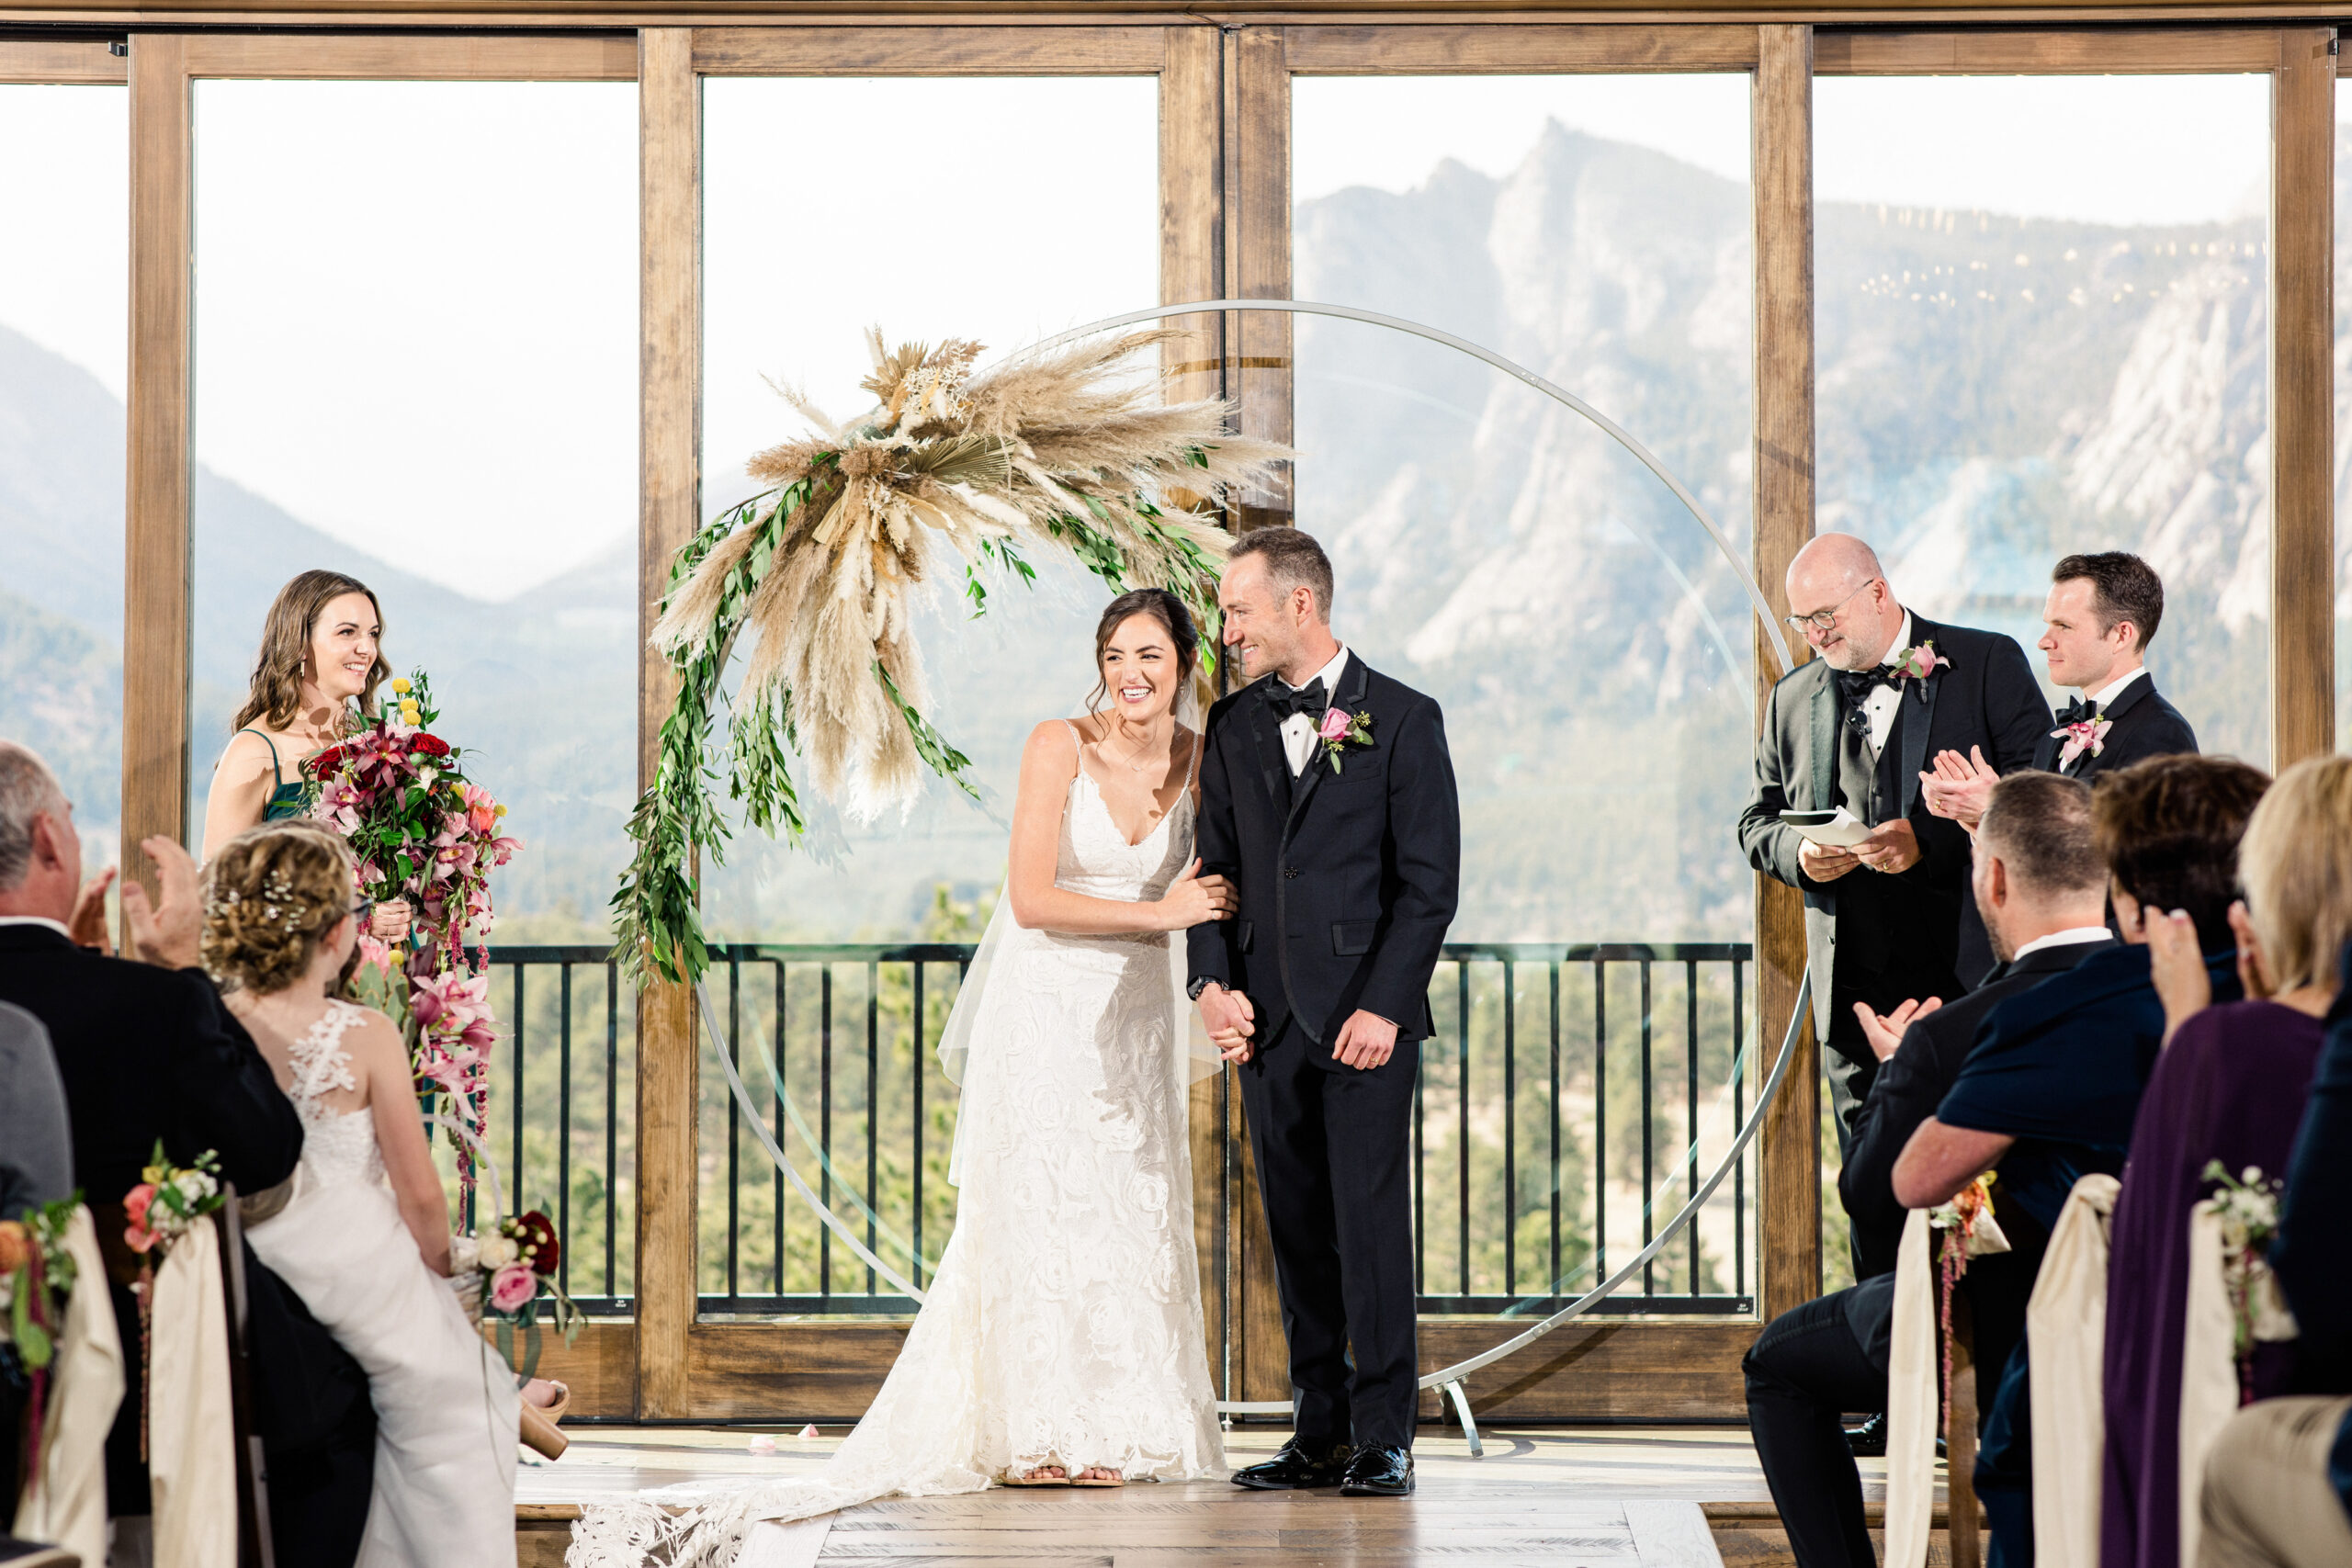 Couple during their wedding ceremony at the Boulders at Black Canyon Inn venue in Estes Park, Colorado